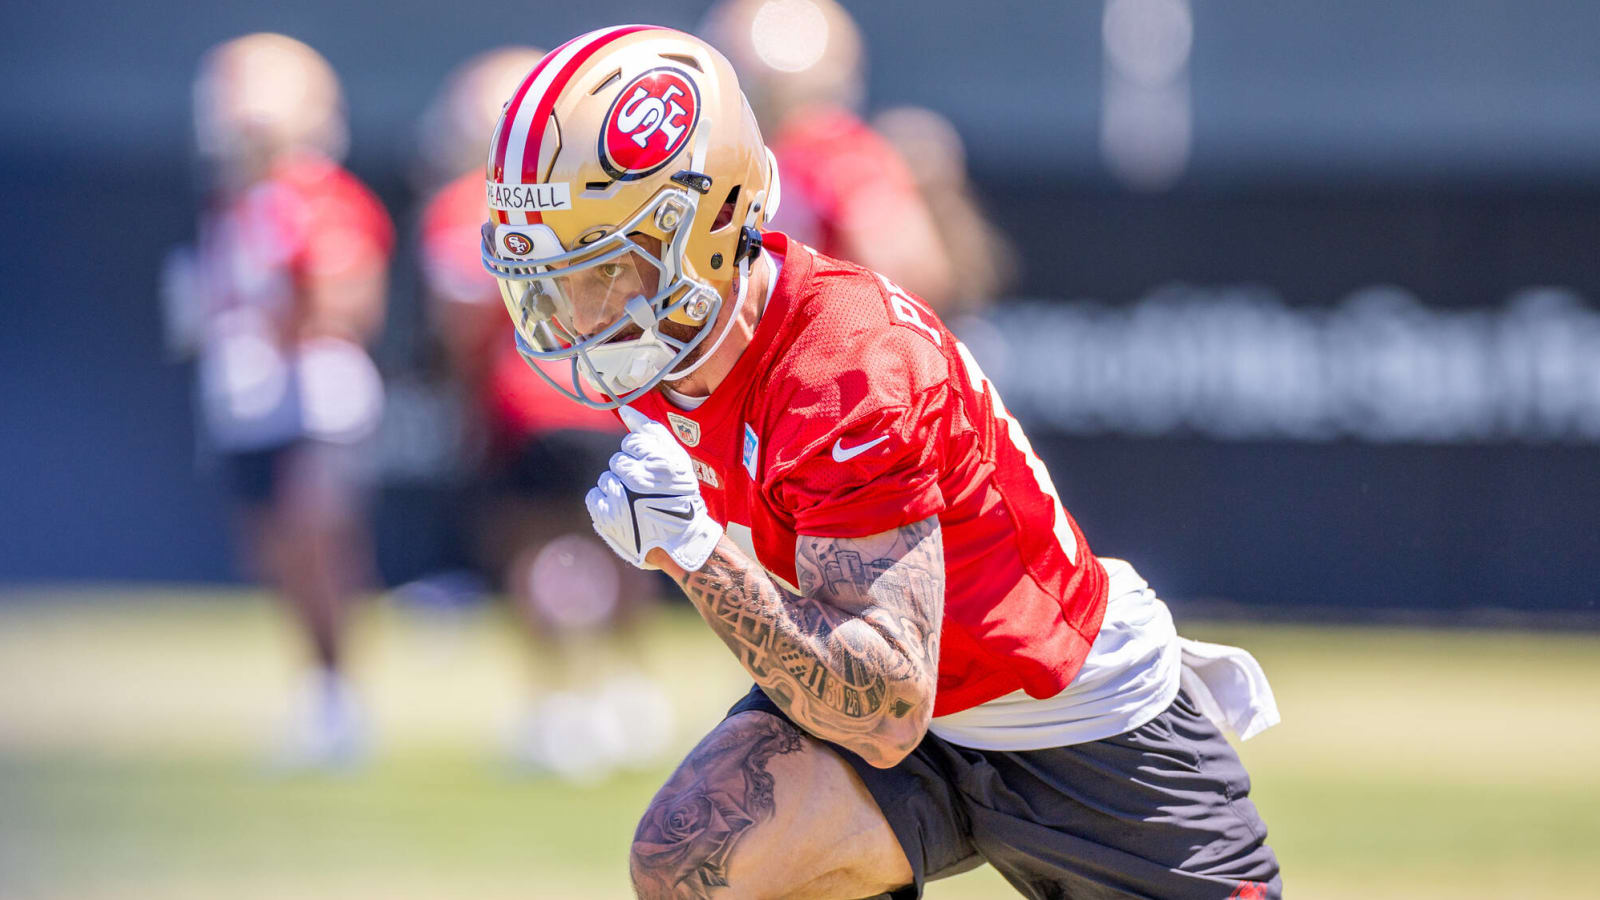 NFLPA Rookie Premiere offers glimpse of Ricky Pearsall in full 49ers uniform